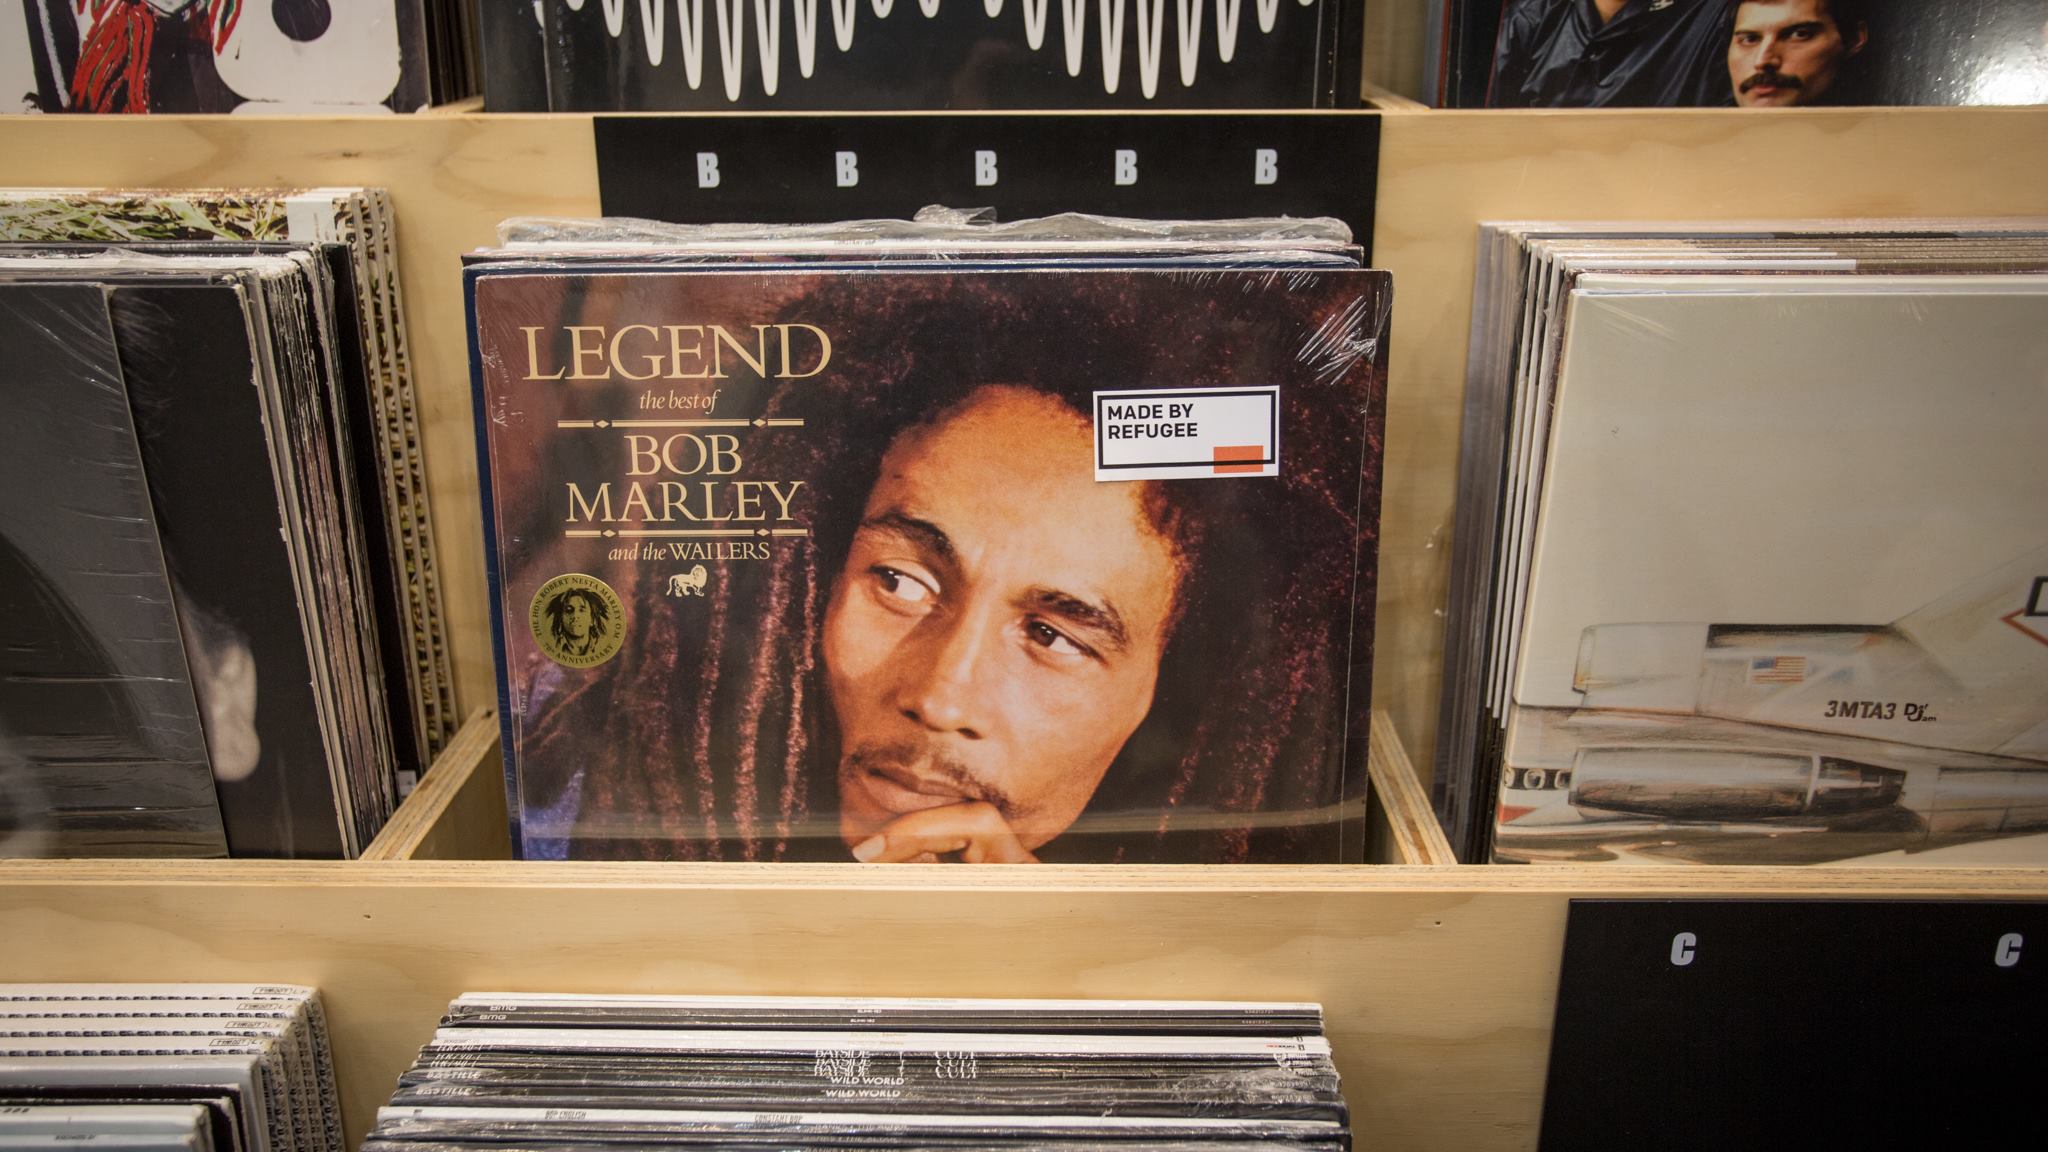 Photo of Bob Marley album with "Made by Refugee" sticker